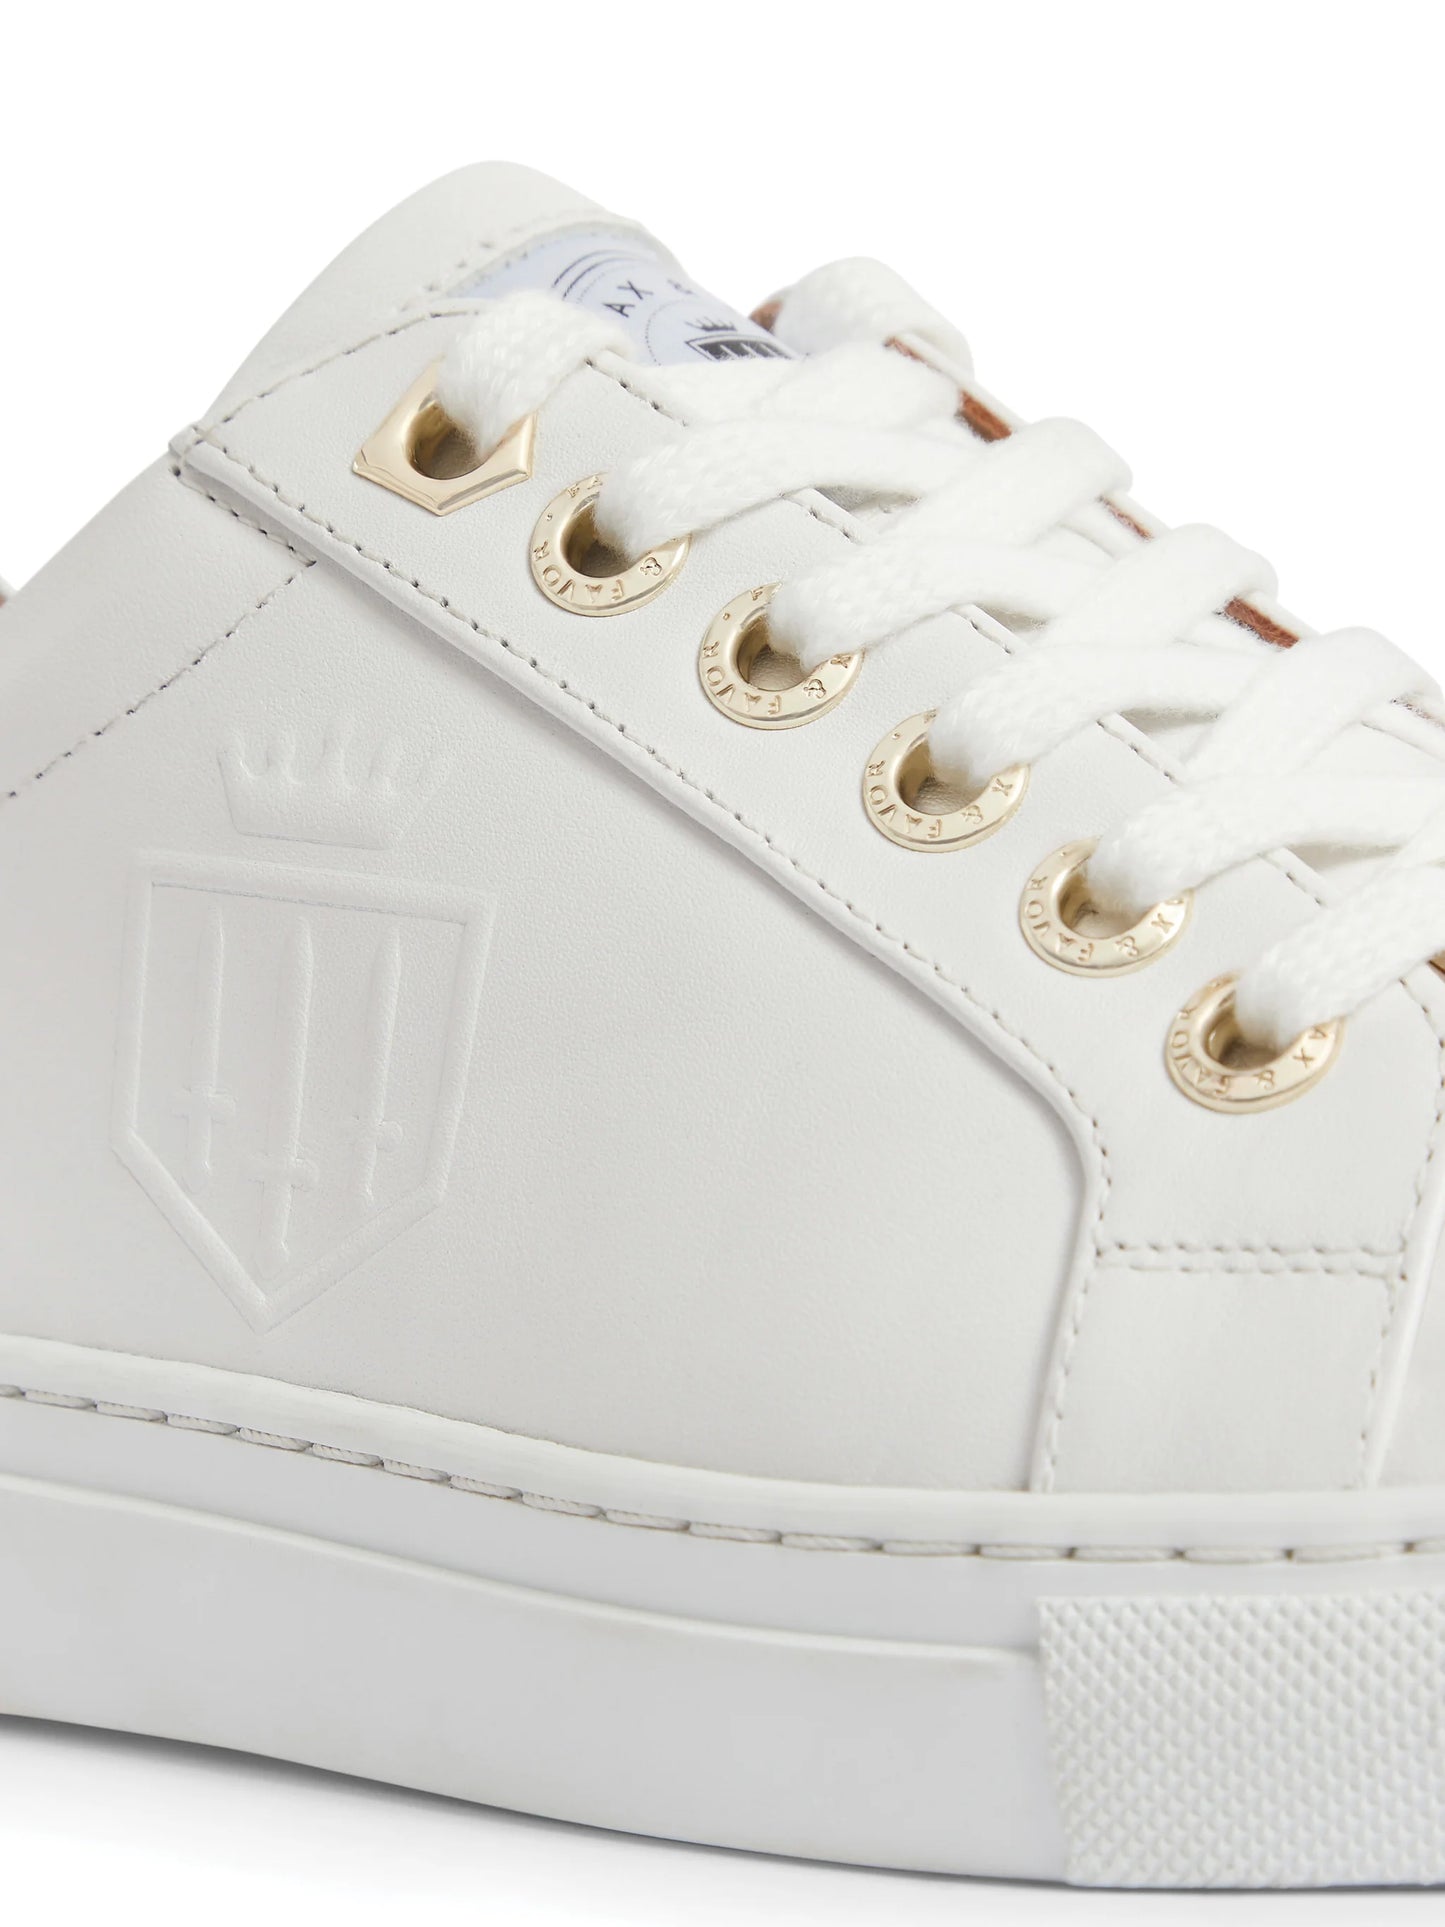 Finchley White Trainer